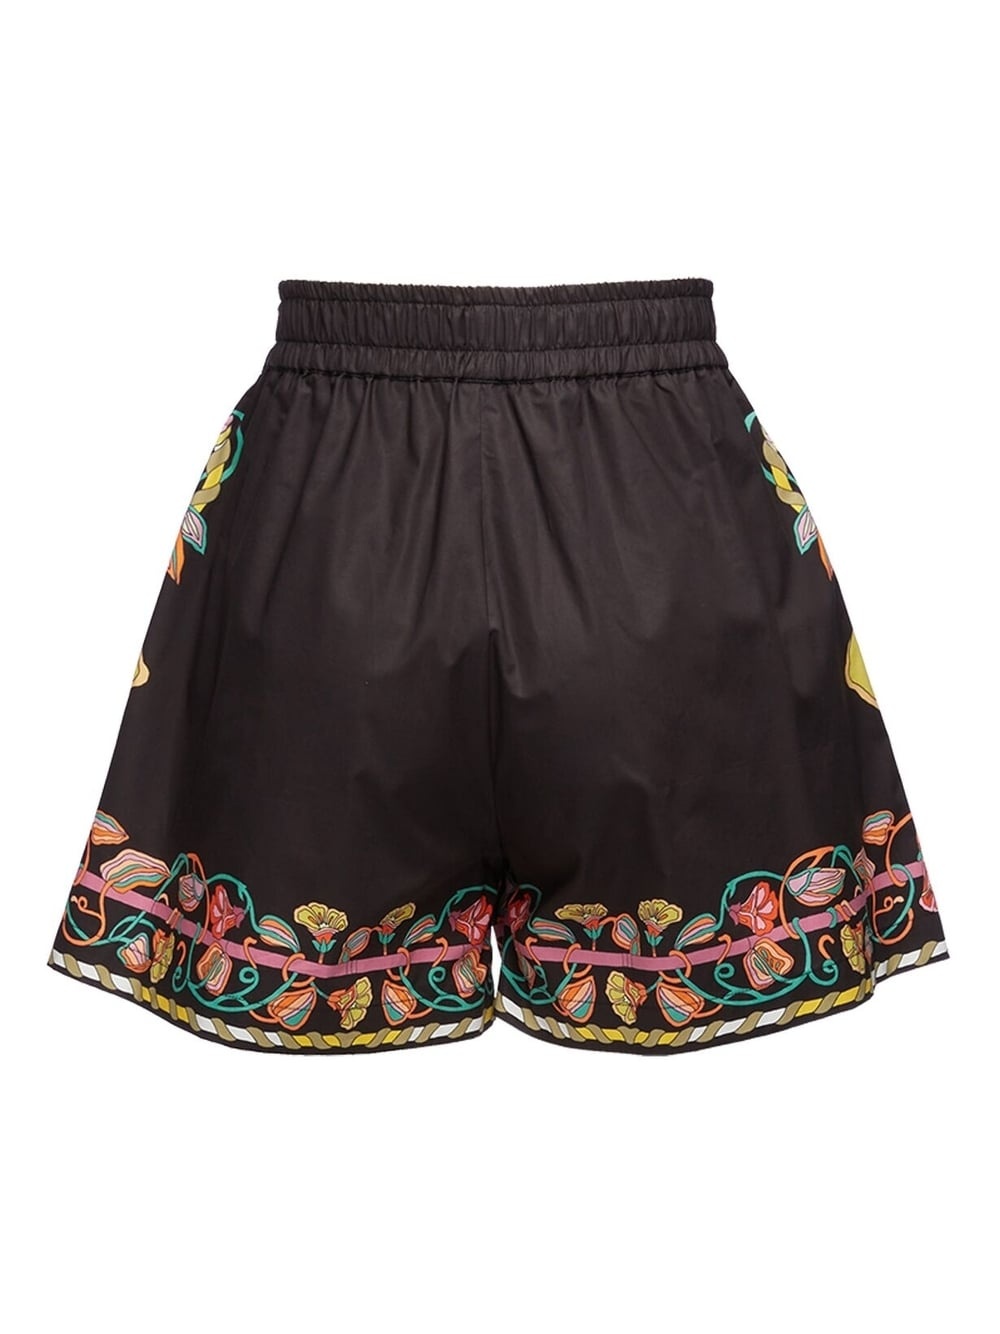 floral silhouette printed shorts - 5